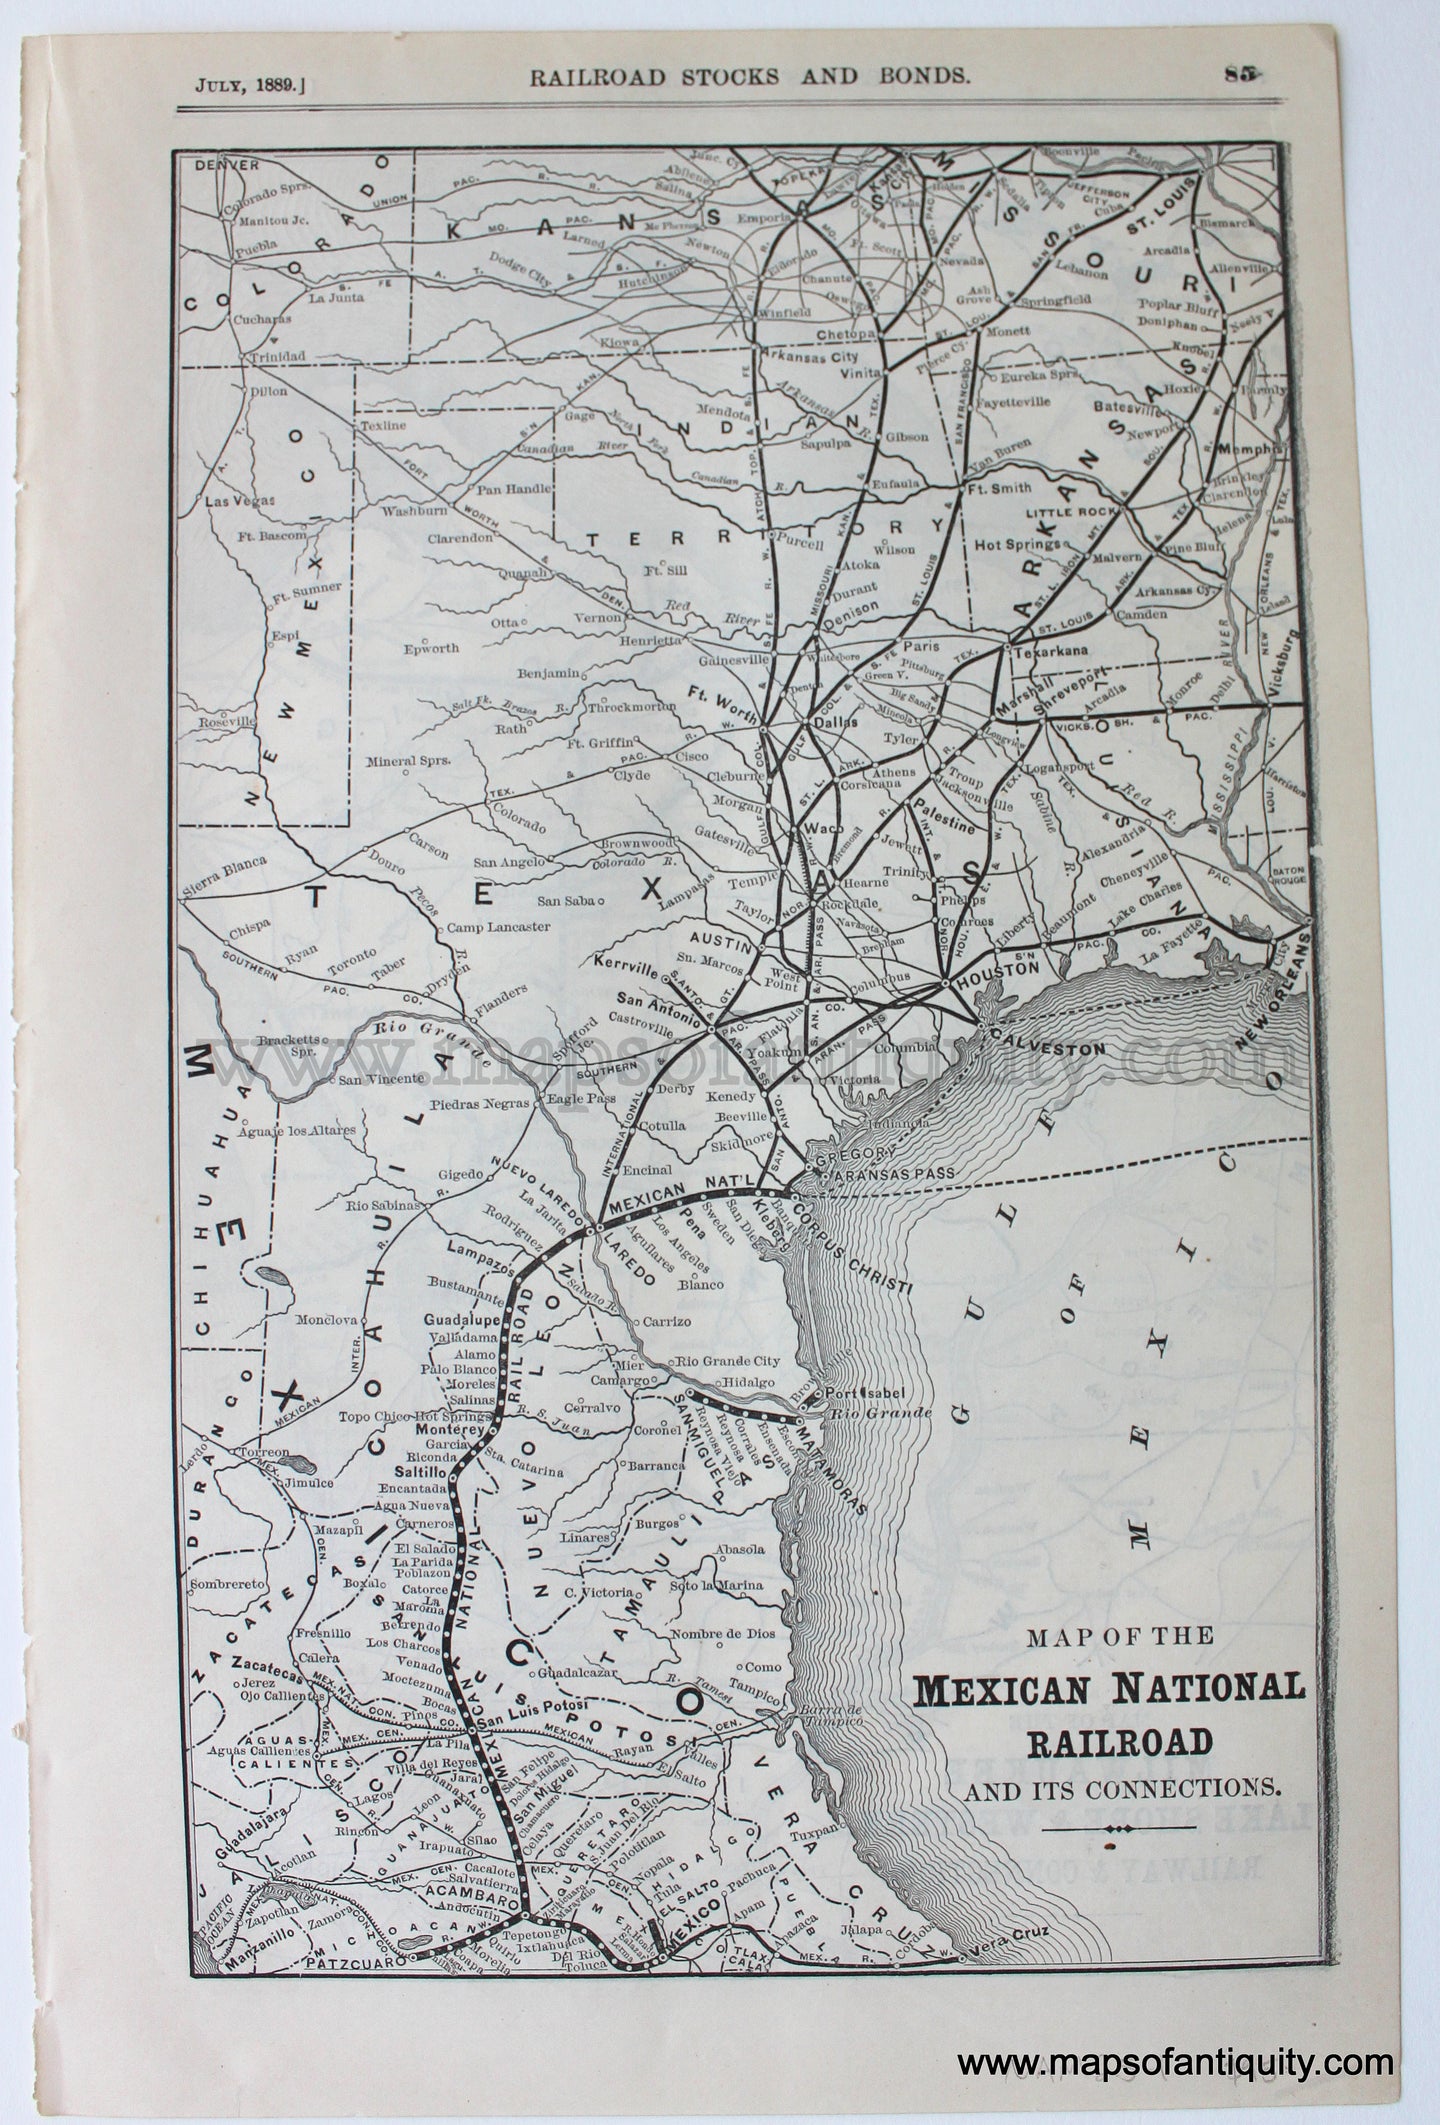 Antique-Uncolored-Railroad-Map-Map-of-the-Mexican-National-Railroad-and-its-Connections-verso:-Map-of-the-Milwaukee-Lake-Shore-&-Western-Railway-&-Connections-1889-Railroad-Stock-and-Bonds-Magazine-Midwest-1800s-19th-century-Maps-of-Antiquity